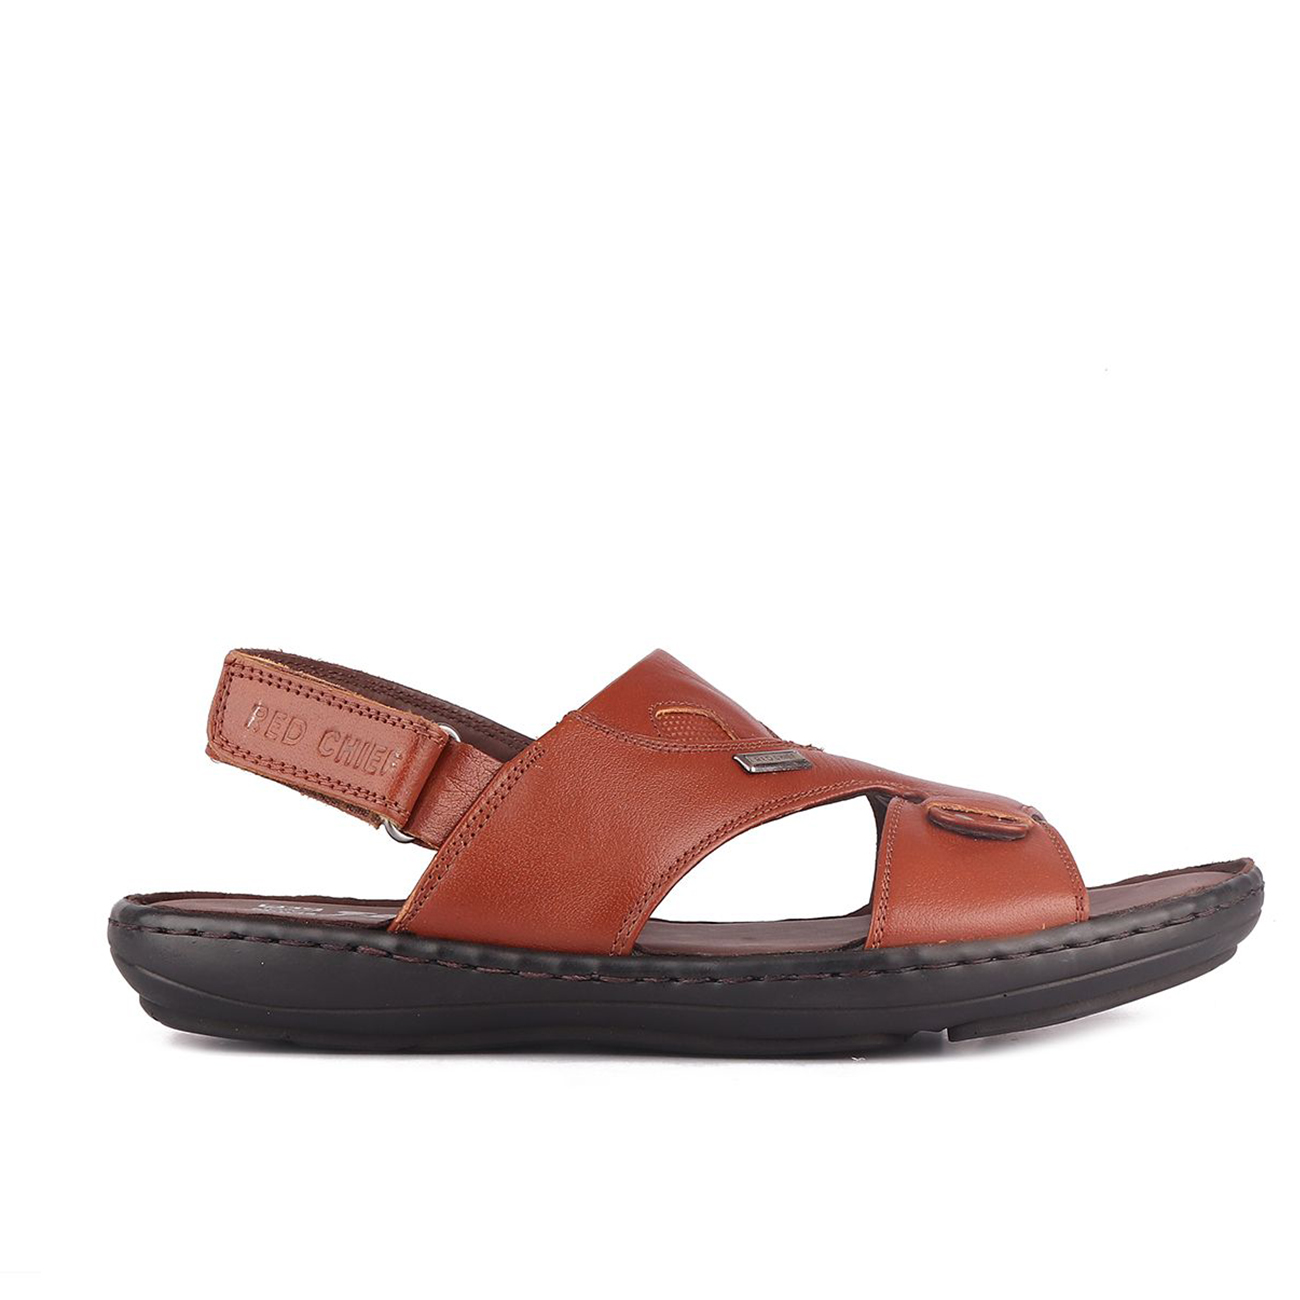 Red Chief Black Leather Sandals - Buy Red Chief Black Leather Sandals  Online at Best Prices in India on Snapdeal